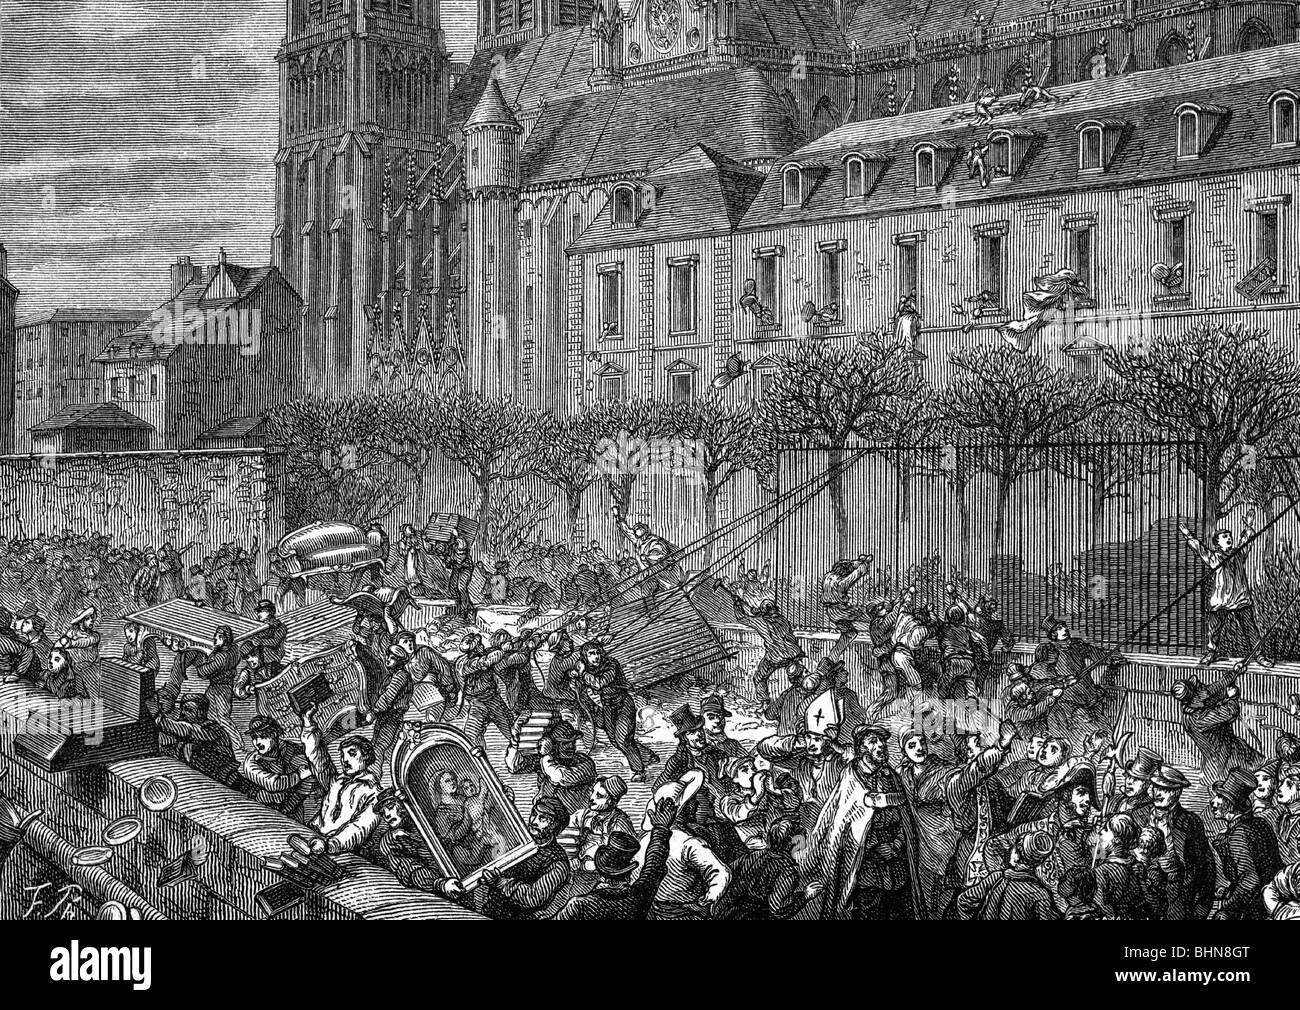 geography / travel, France, revolution 1830, July revolution 26.6.1830-29.7.1830, destruction and plunder of the palace of the archbishop, Paris, later wood engraving, 19th century, historic, historical, ravage, depredation, ravages, depredations, church, churches, sacral, sacred, building, buildings, crowds, crowd, insurgency, revolt, rebellion, insurgencies, revolts, rebellions, be in revolt, insurgent, insurgents, rebel, rebels, revolter, revolters, events, Western Europe, people, Stock Photo